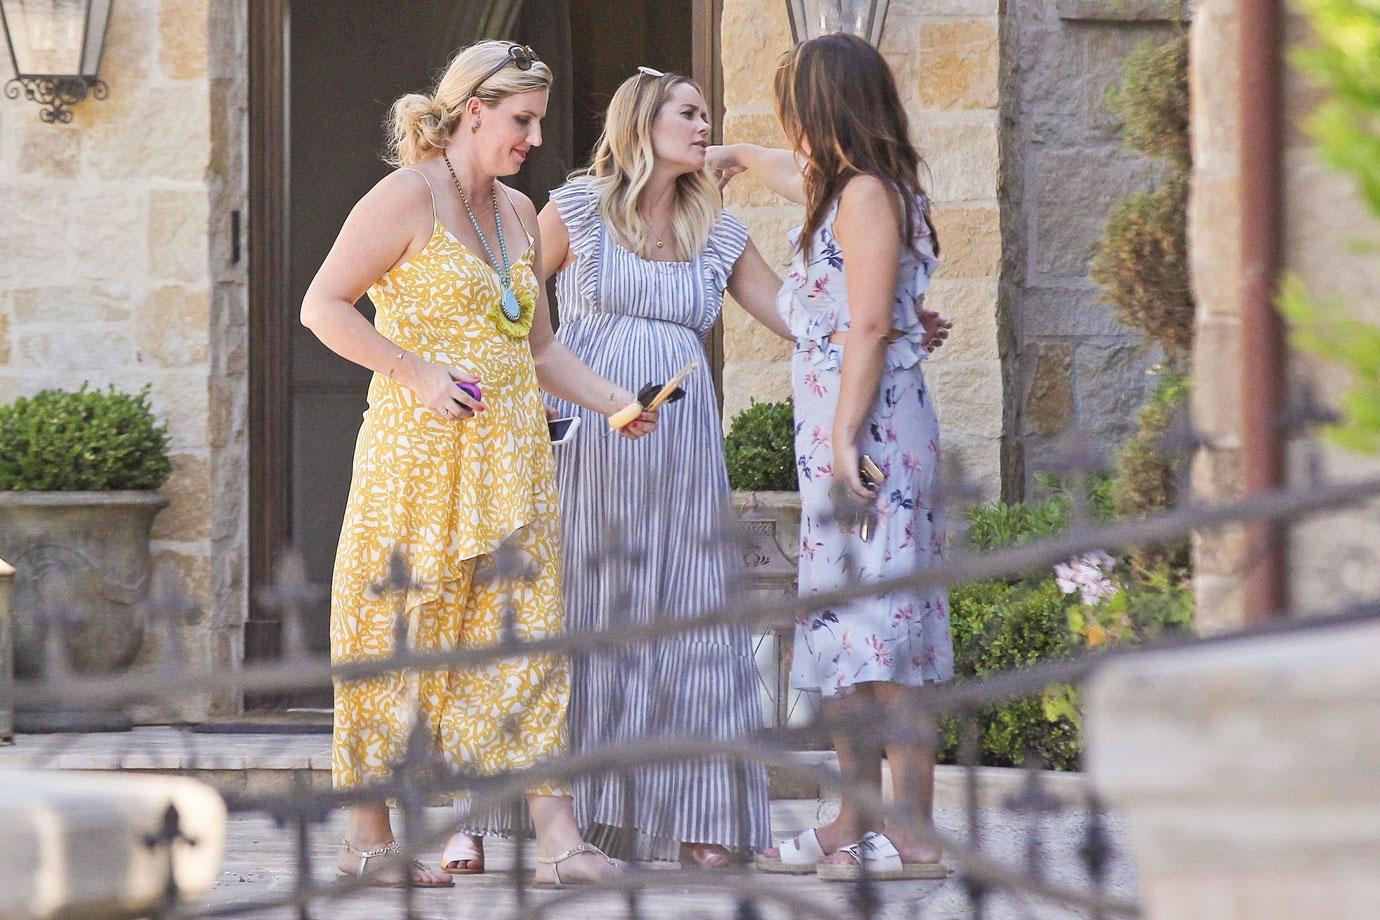 PICS] Pregnant Lauren Conrad Is SO Adorable At Her Baby Shower!